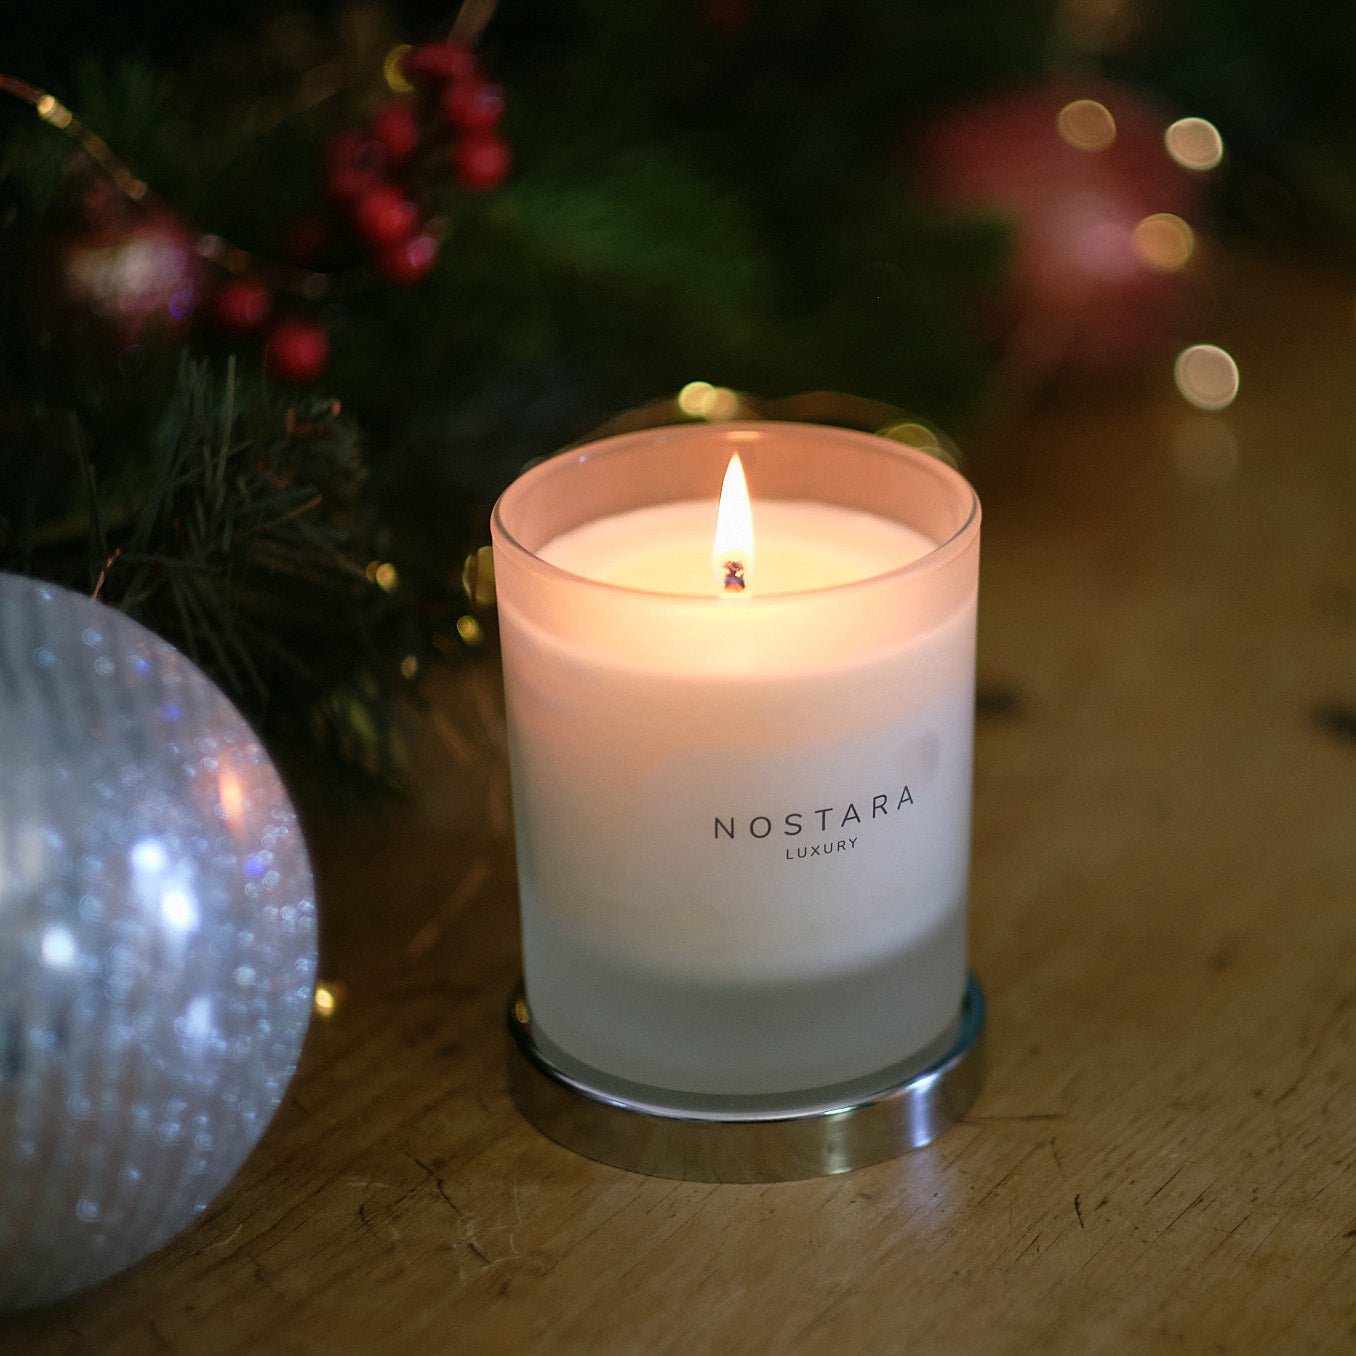 Nostara scented candle in christmas setting